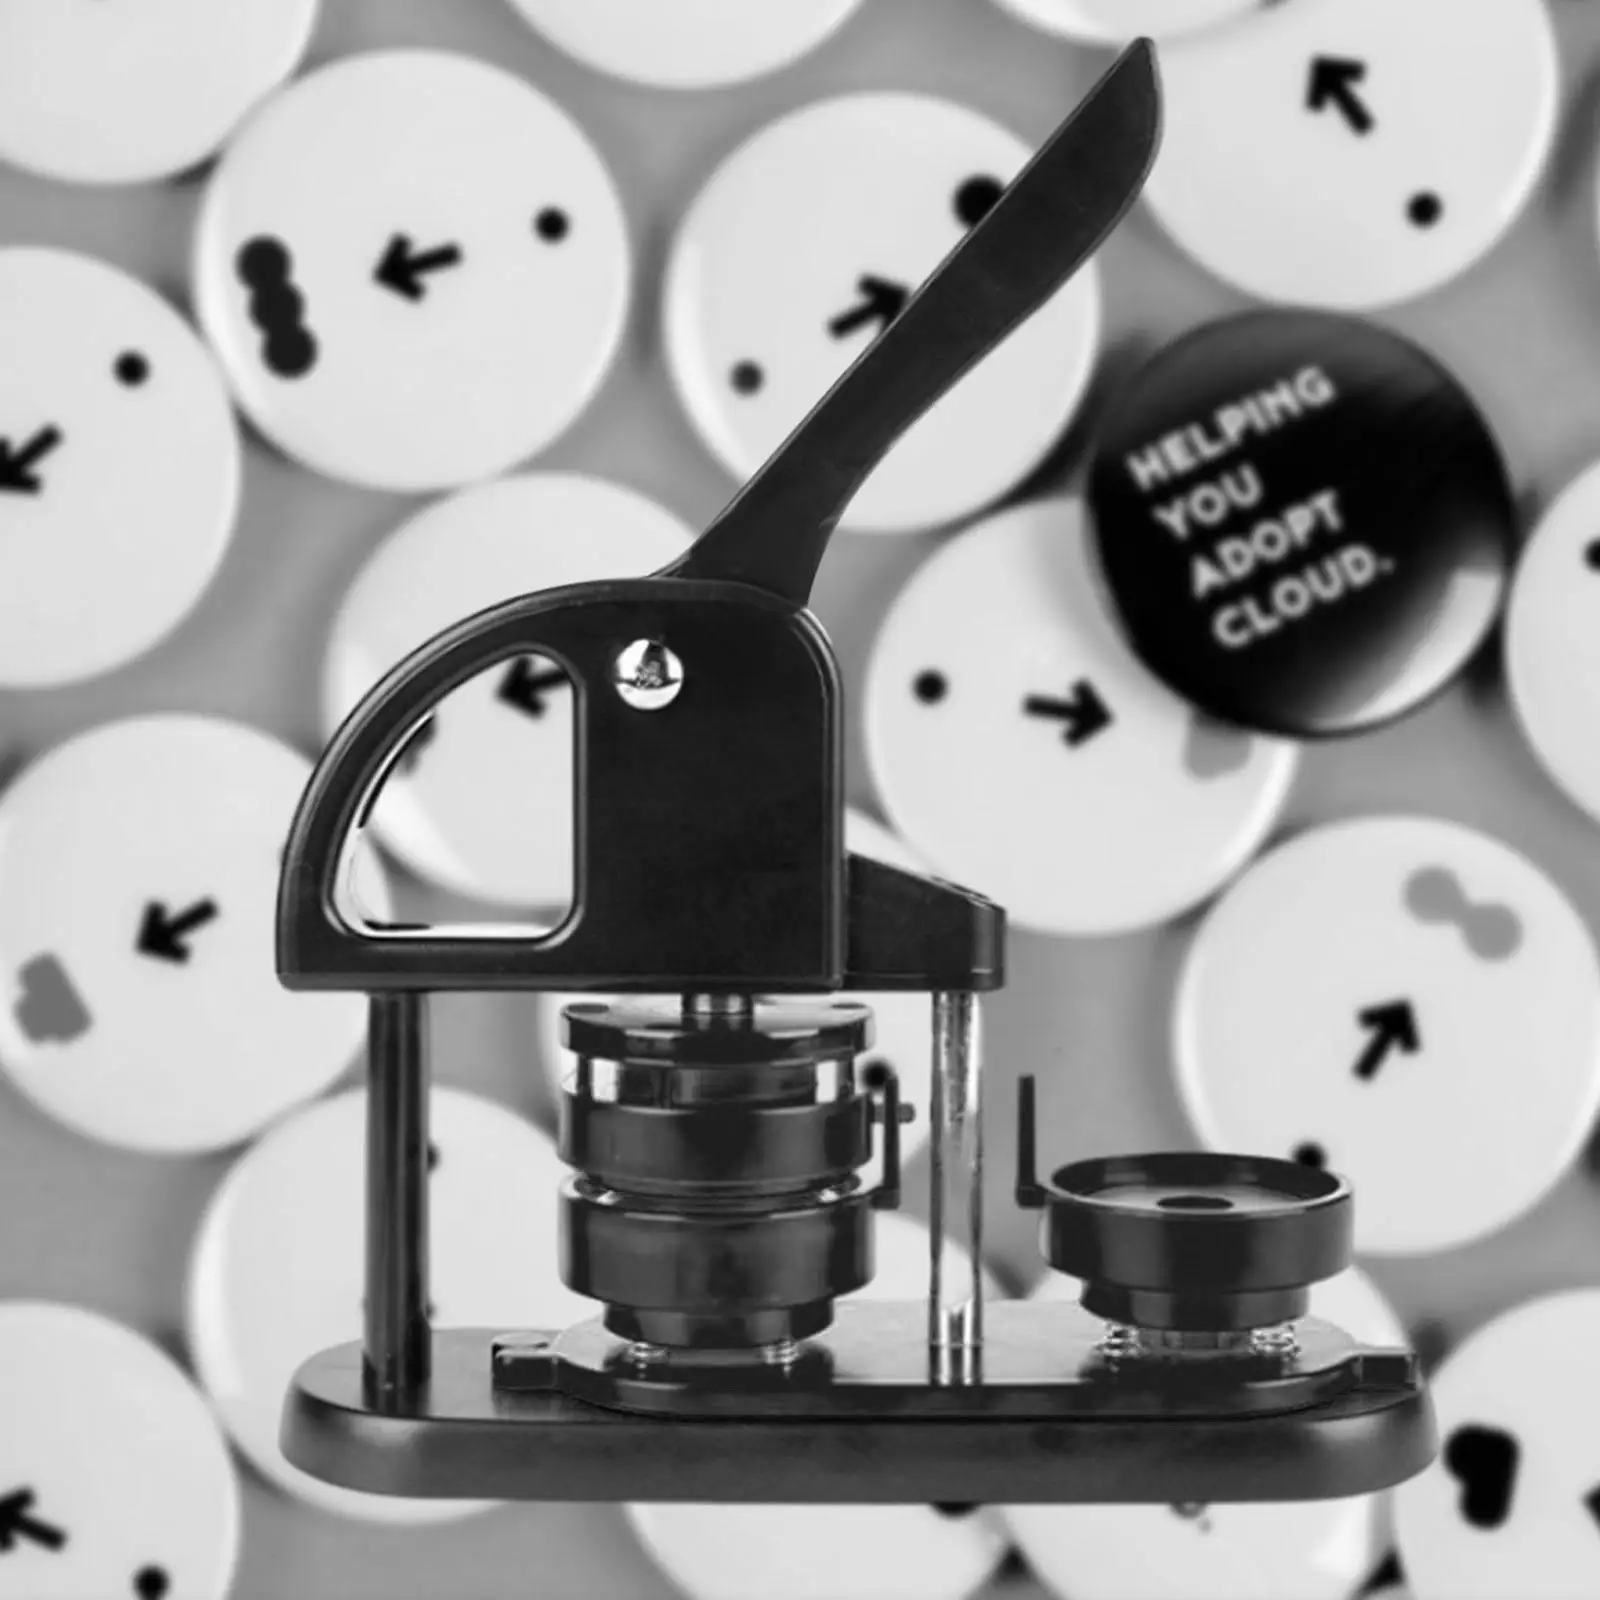 Button Badge Machine Pin Maker Handmade Round Badge Making Children Craft Button Maker for DIY Pin Buttons Mirror Gifts Accs